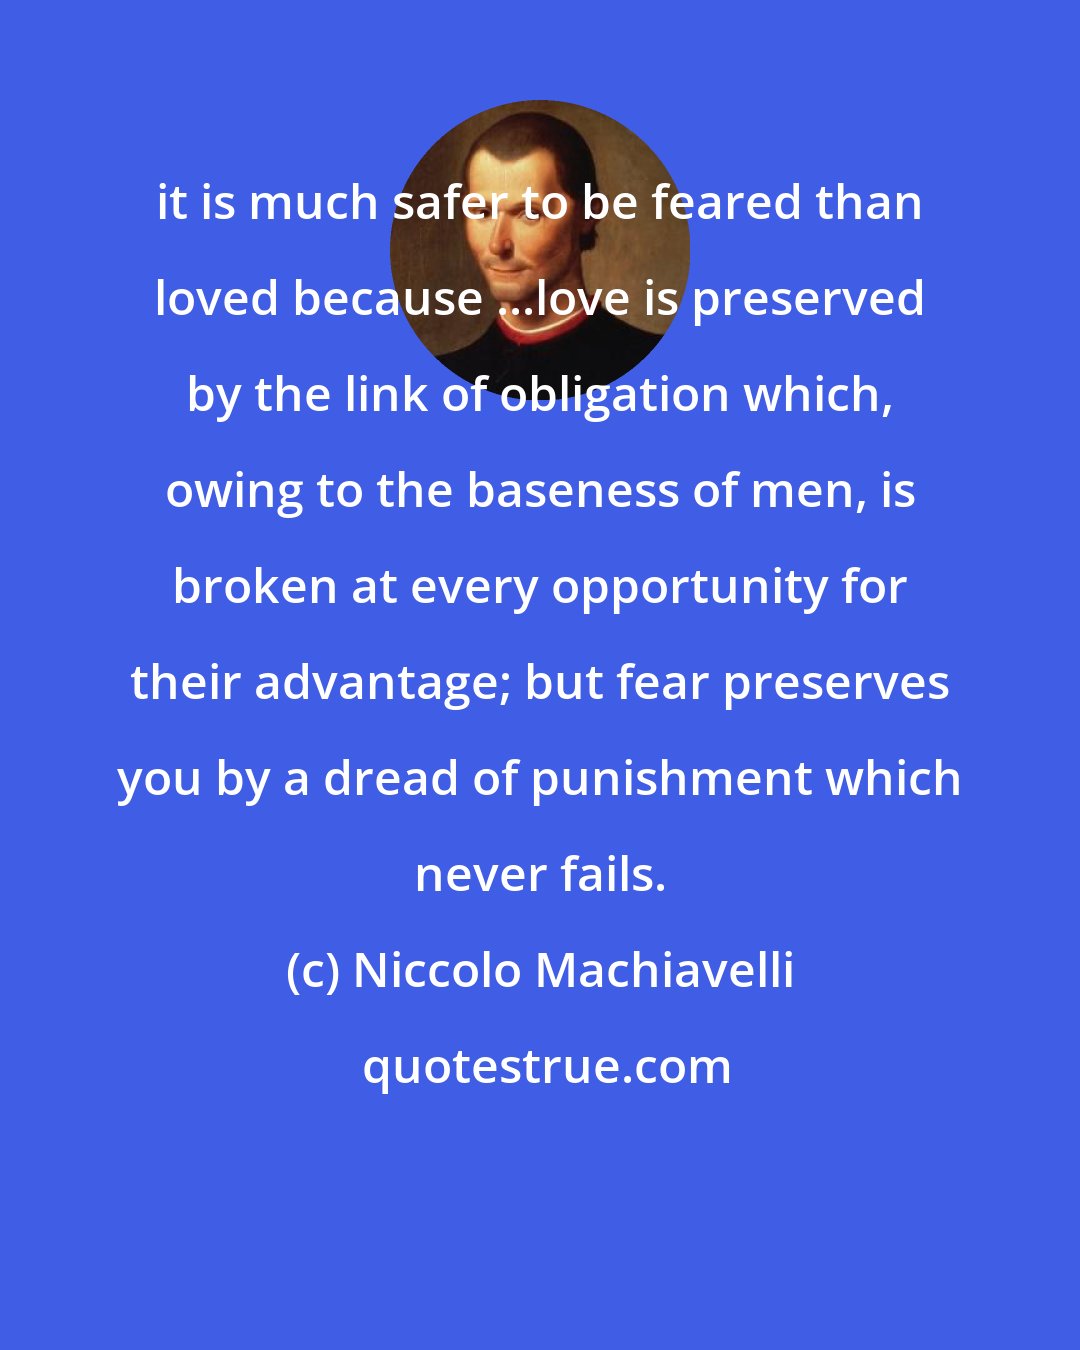 Niccolo Machiavelli: it is much safer to be feared than loved because ...love is preserved by the link of obligation which, owing to the baseness of men, is broken at every opportunity for their advantage; but fear preserves you by a dread of punishment which never fails.